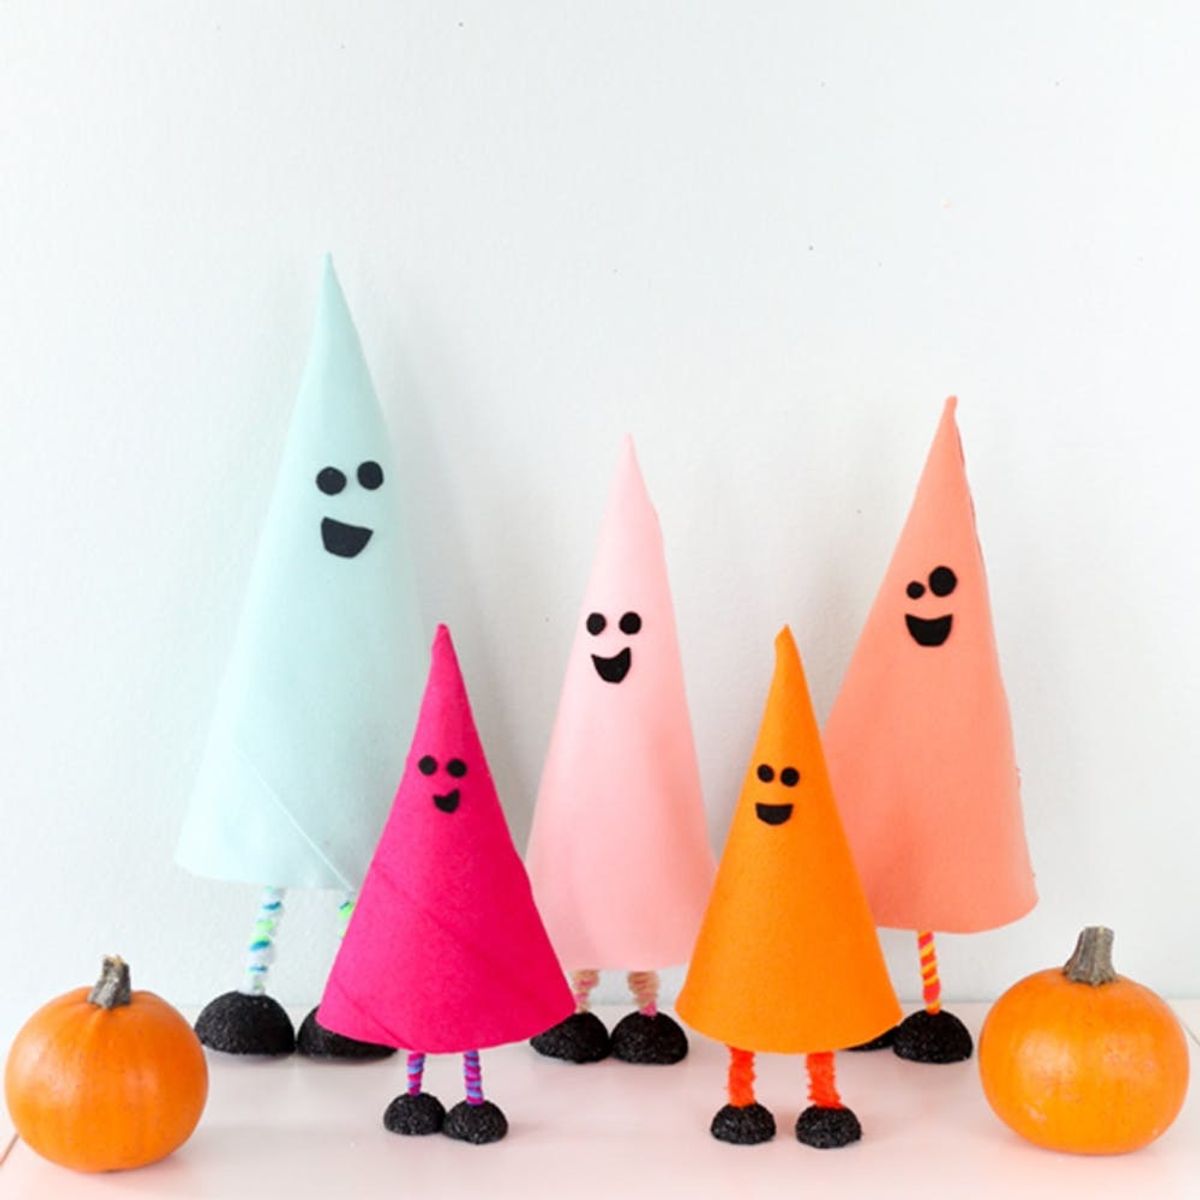 Tassel Drink Stirrers, Boo-tiful Printables, and More Weekend Craft Projects